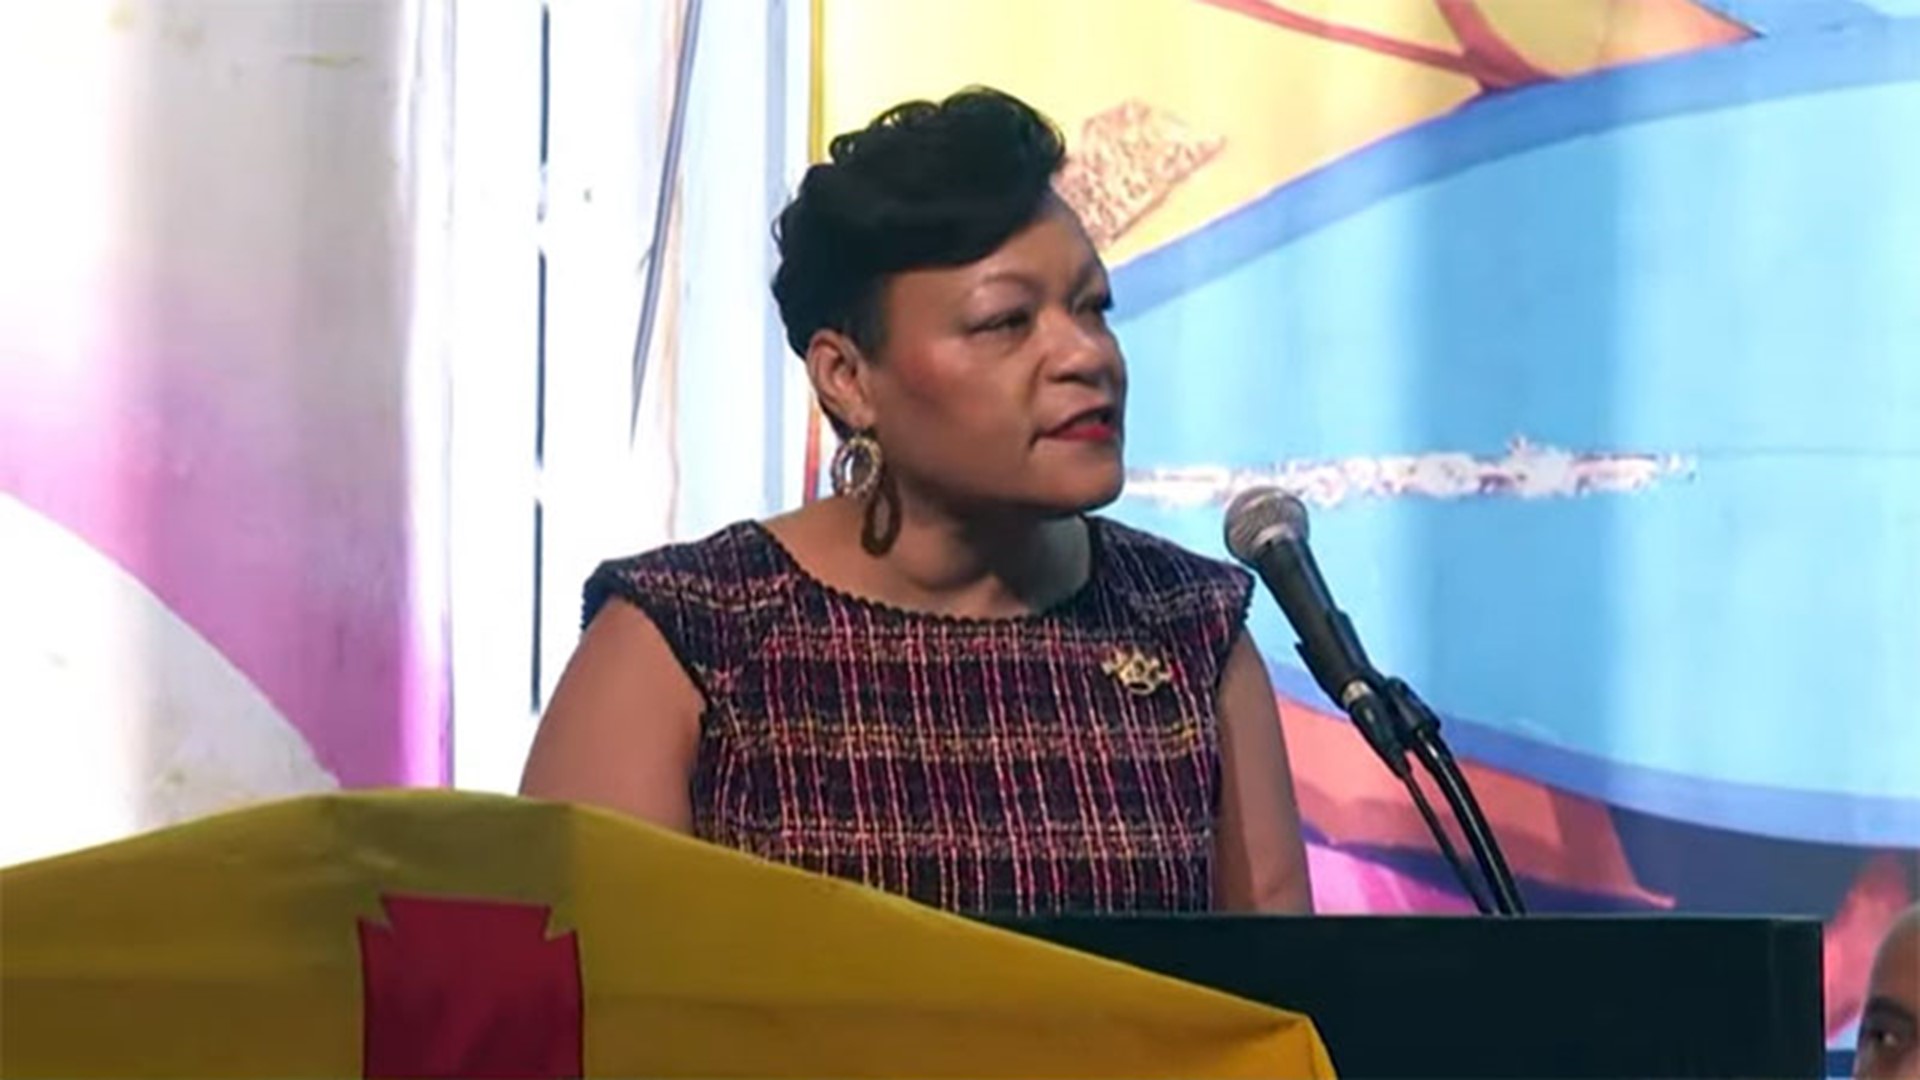 Mayor LaToya Cantrell says that she is offering to hire any post-certified law enforcement agency to help with policing Mardi Gras 2023.